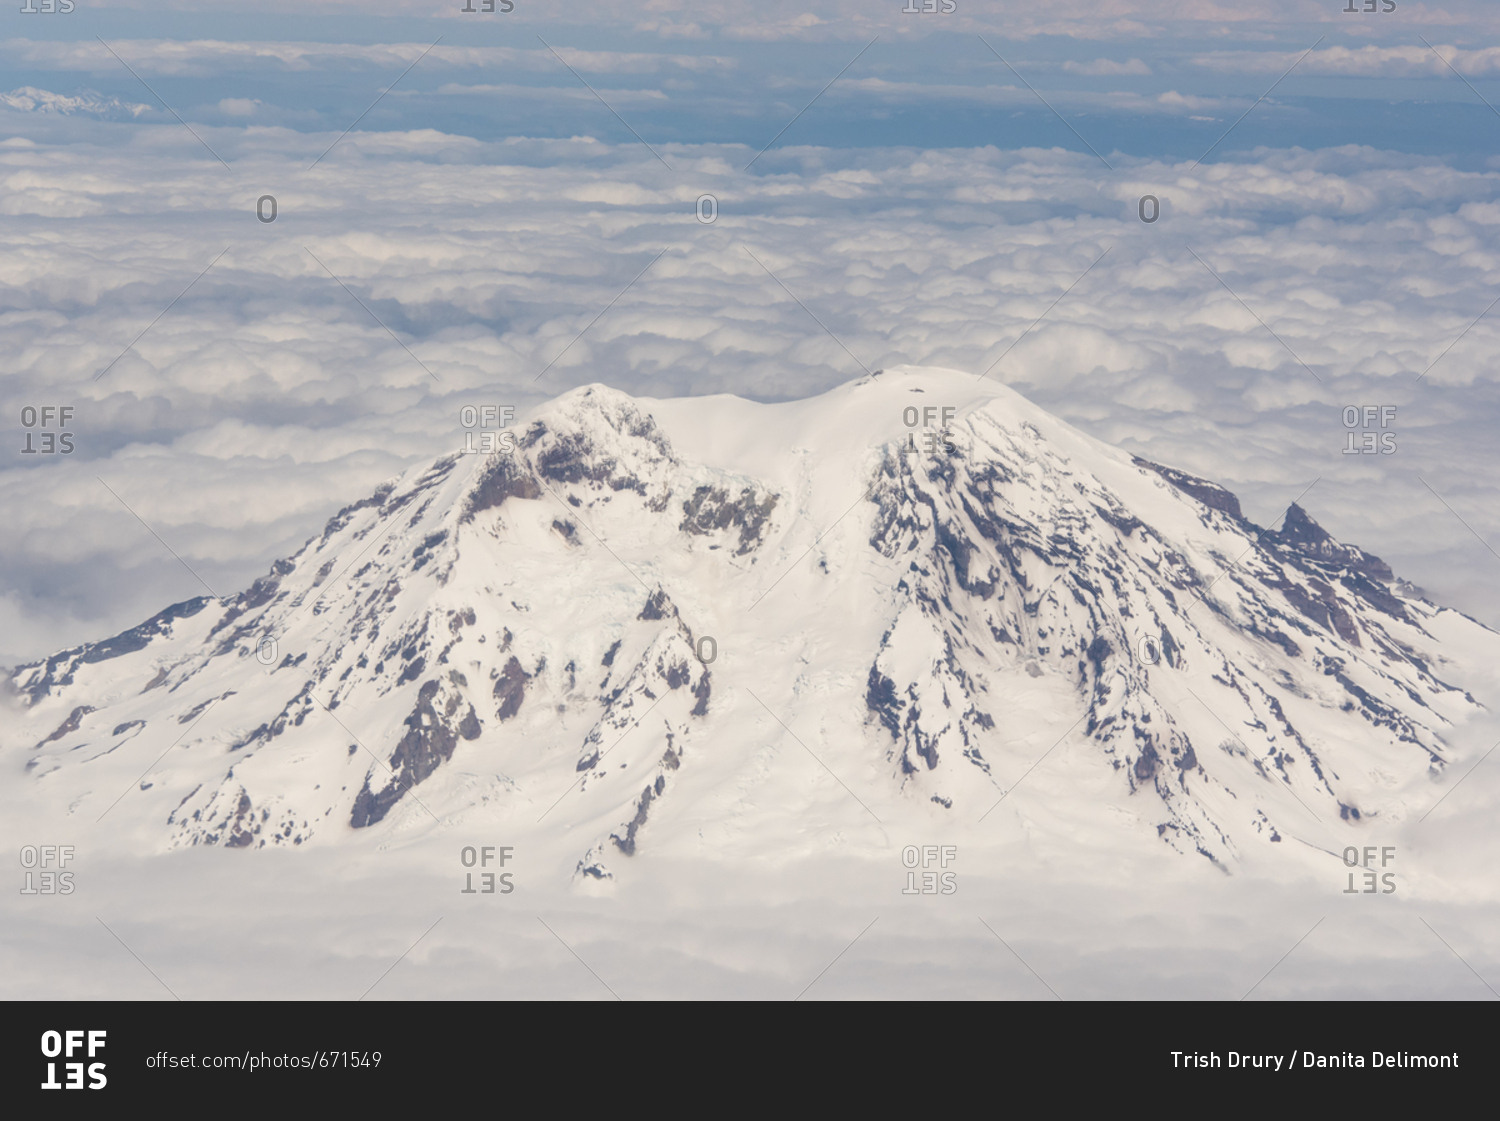 USA, Washington State, Mt, Rainier above clouds, Tallest mountain in Washington State, Stratovolcano, Called Tacoma by Native Americans